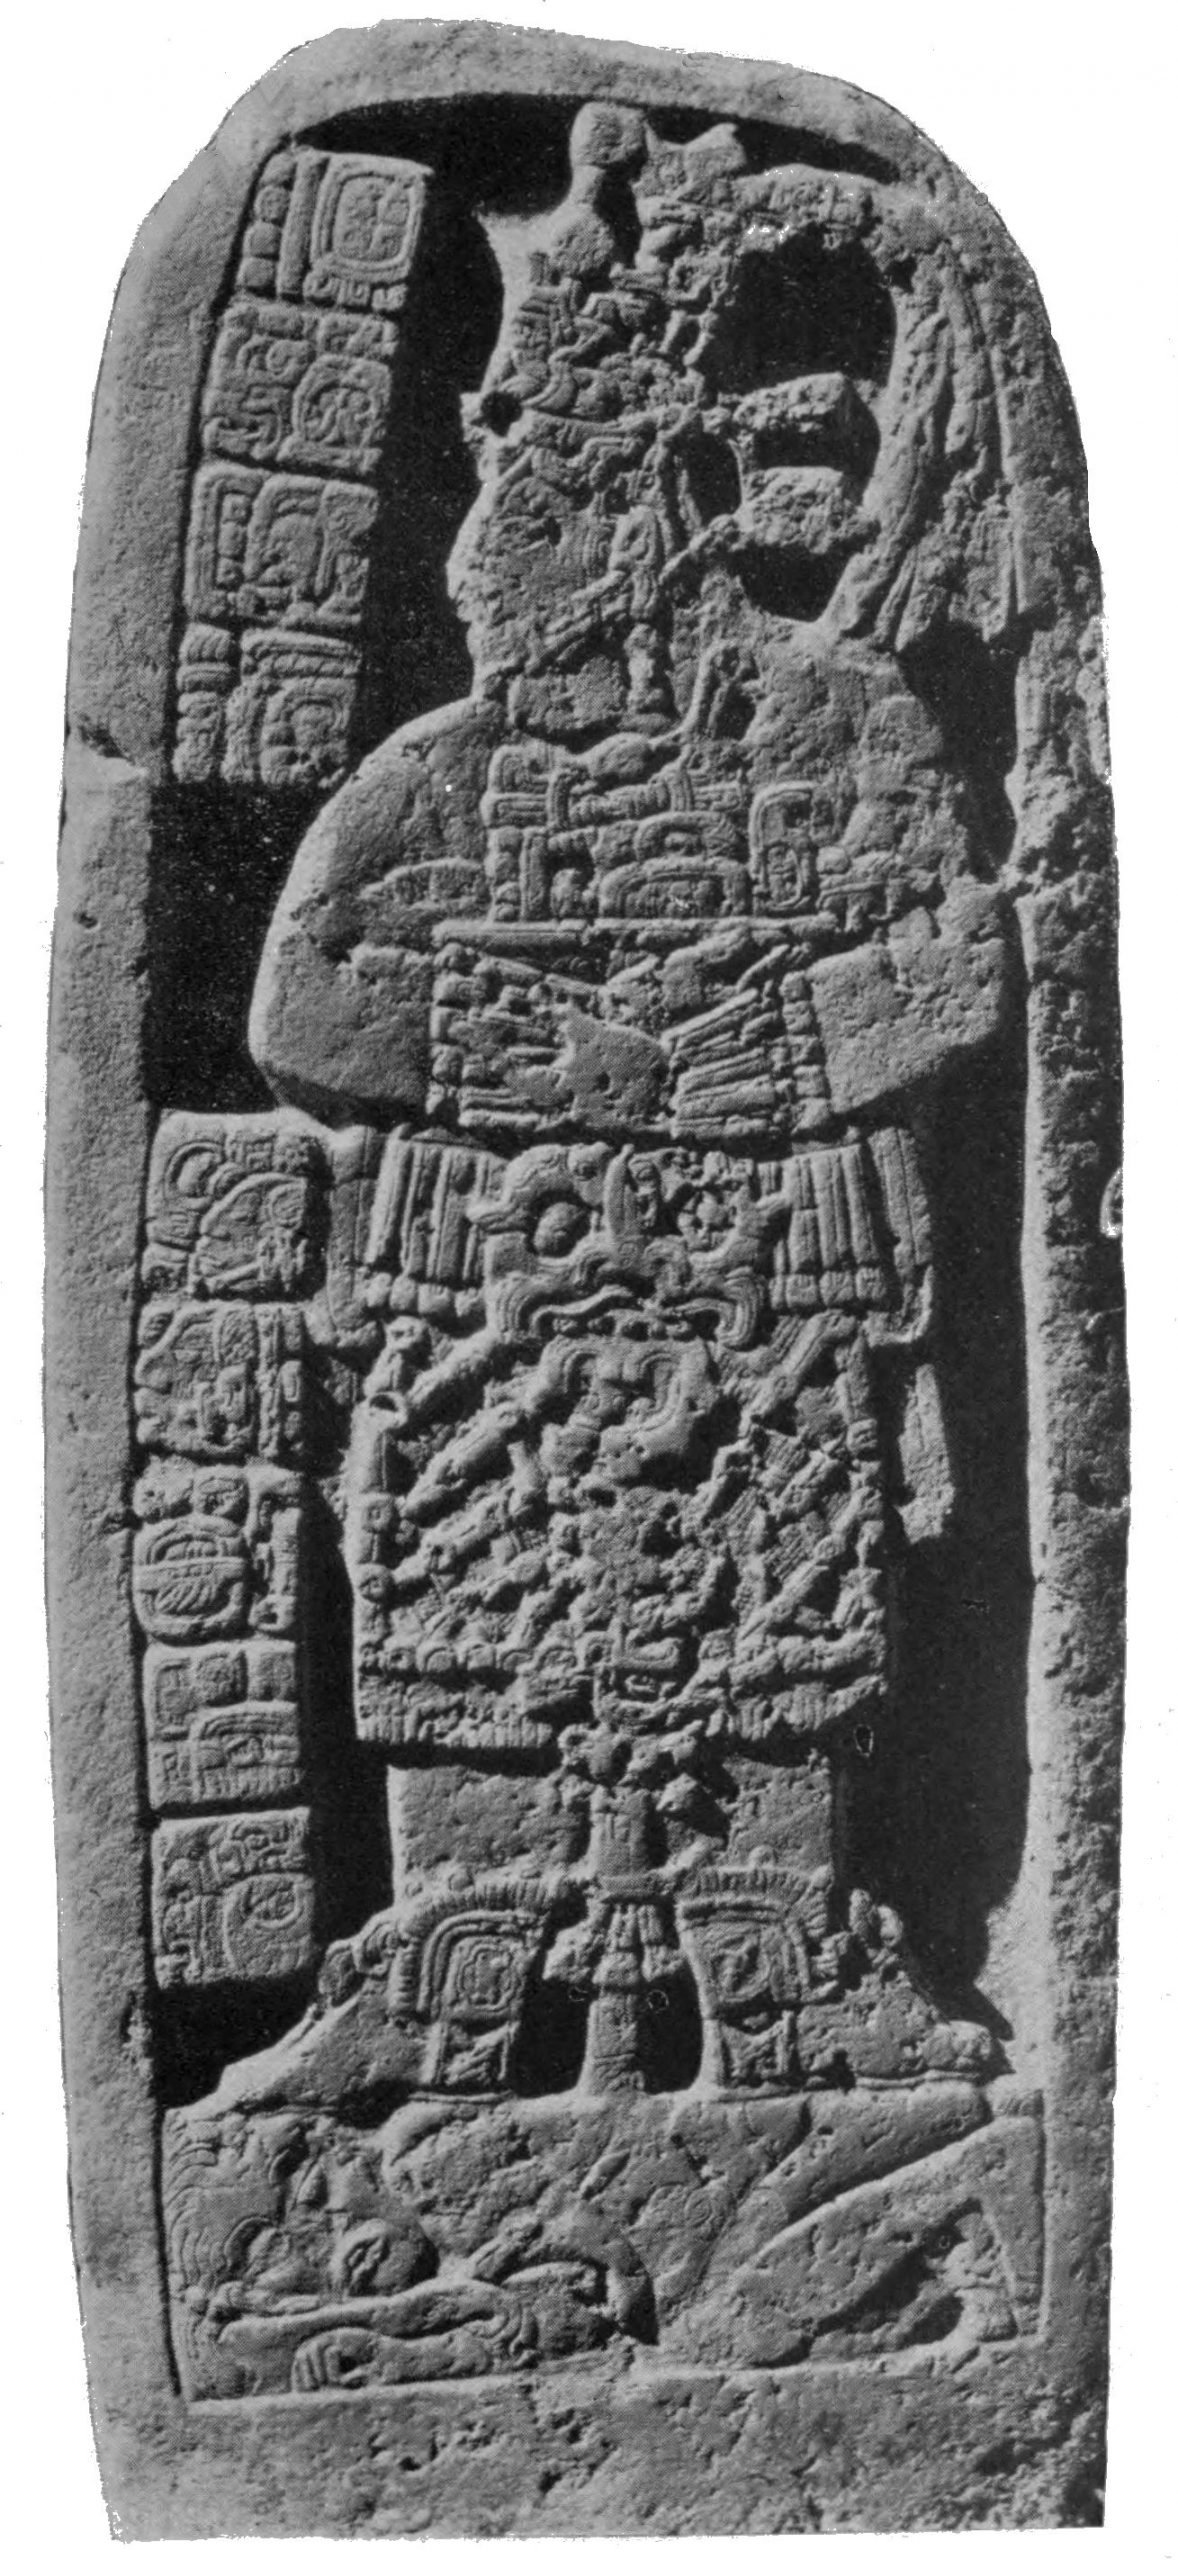 Old photograph of an engraved stone.